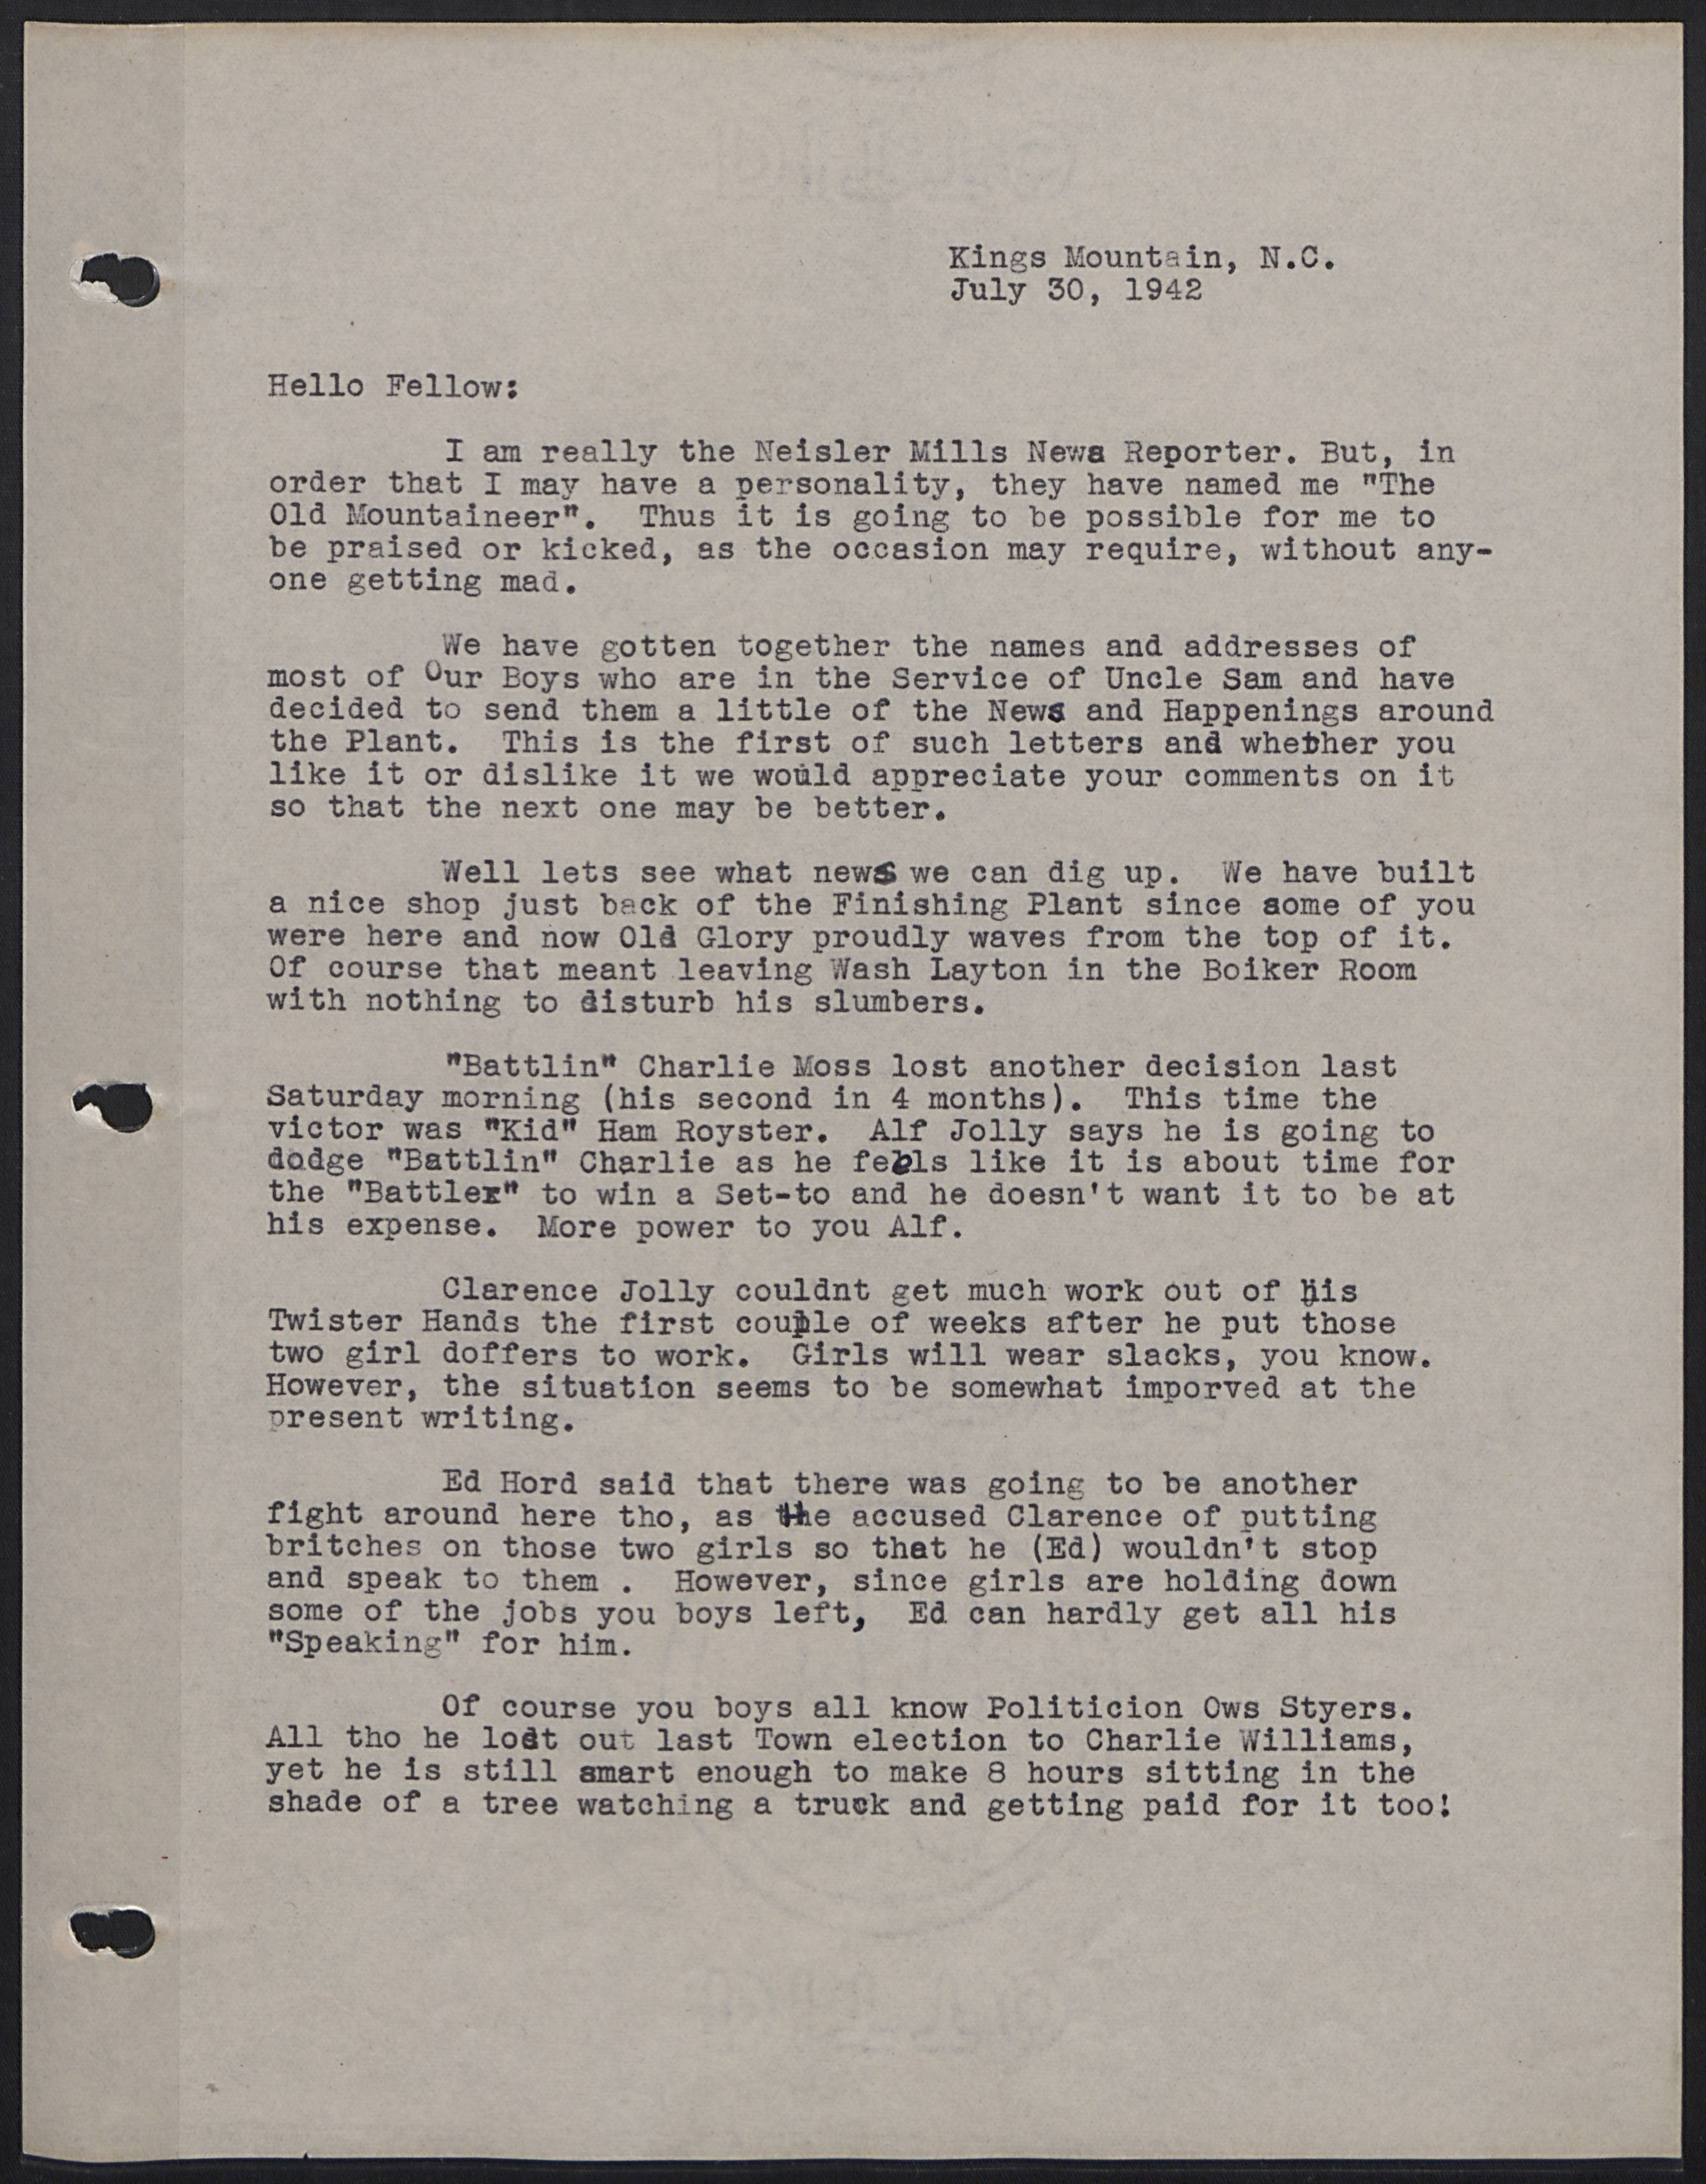 The Old Mountaineer Letters to Servicemen page 5